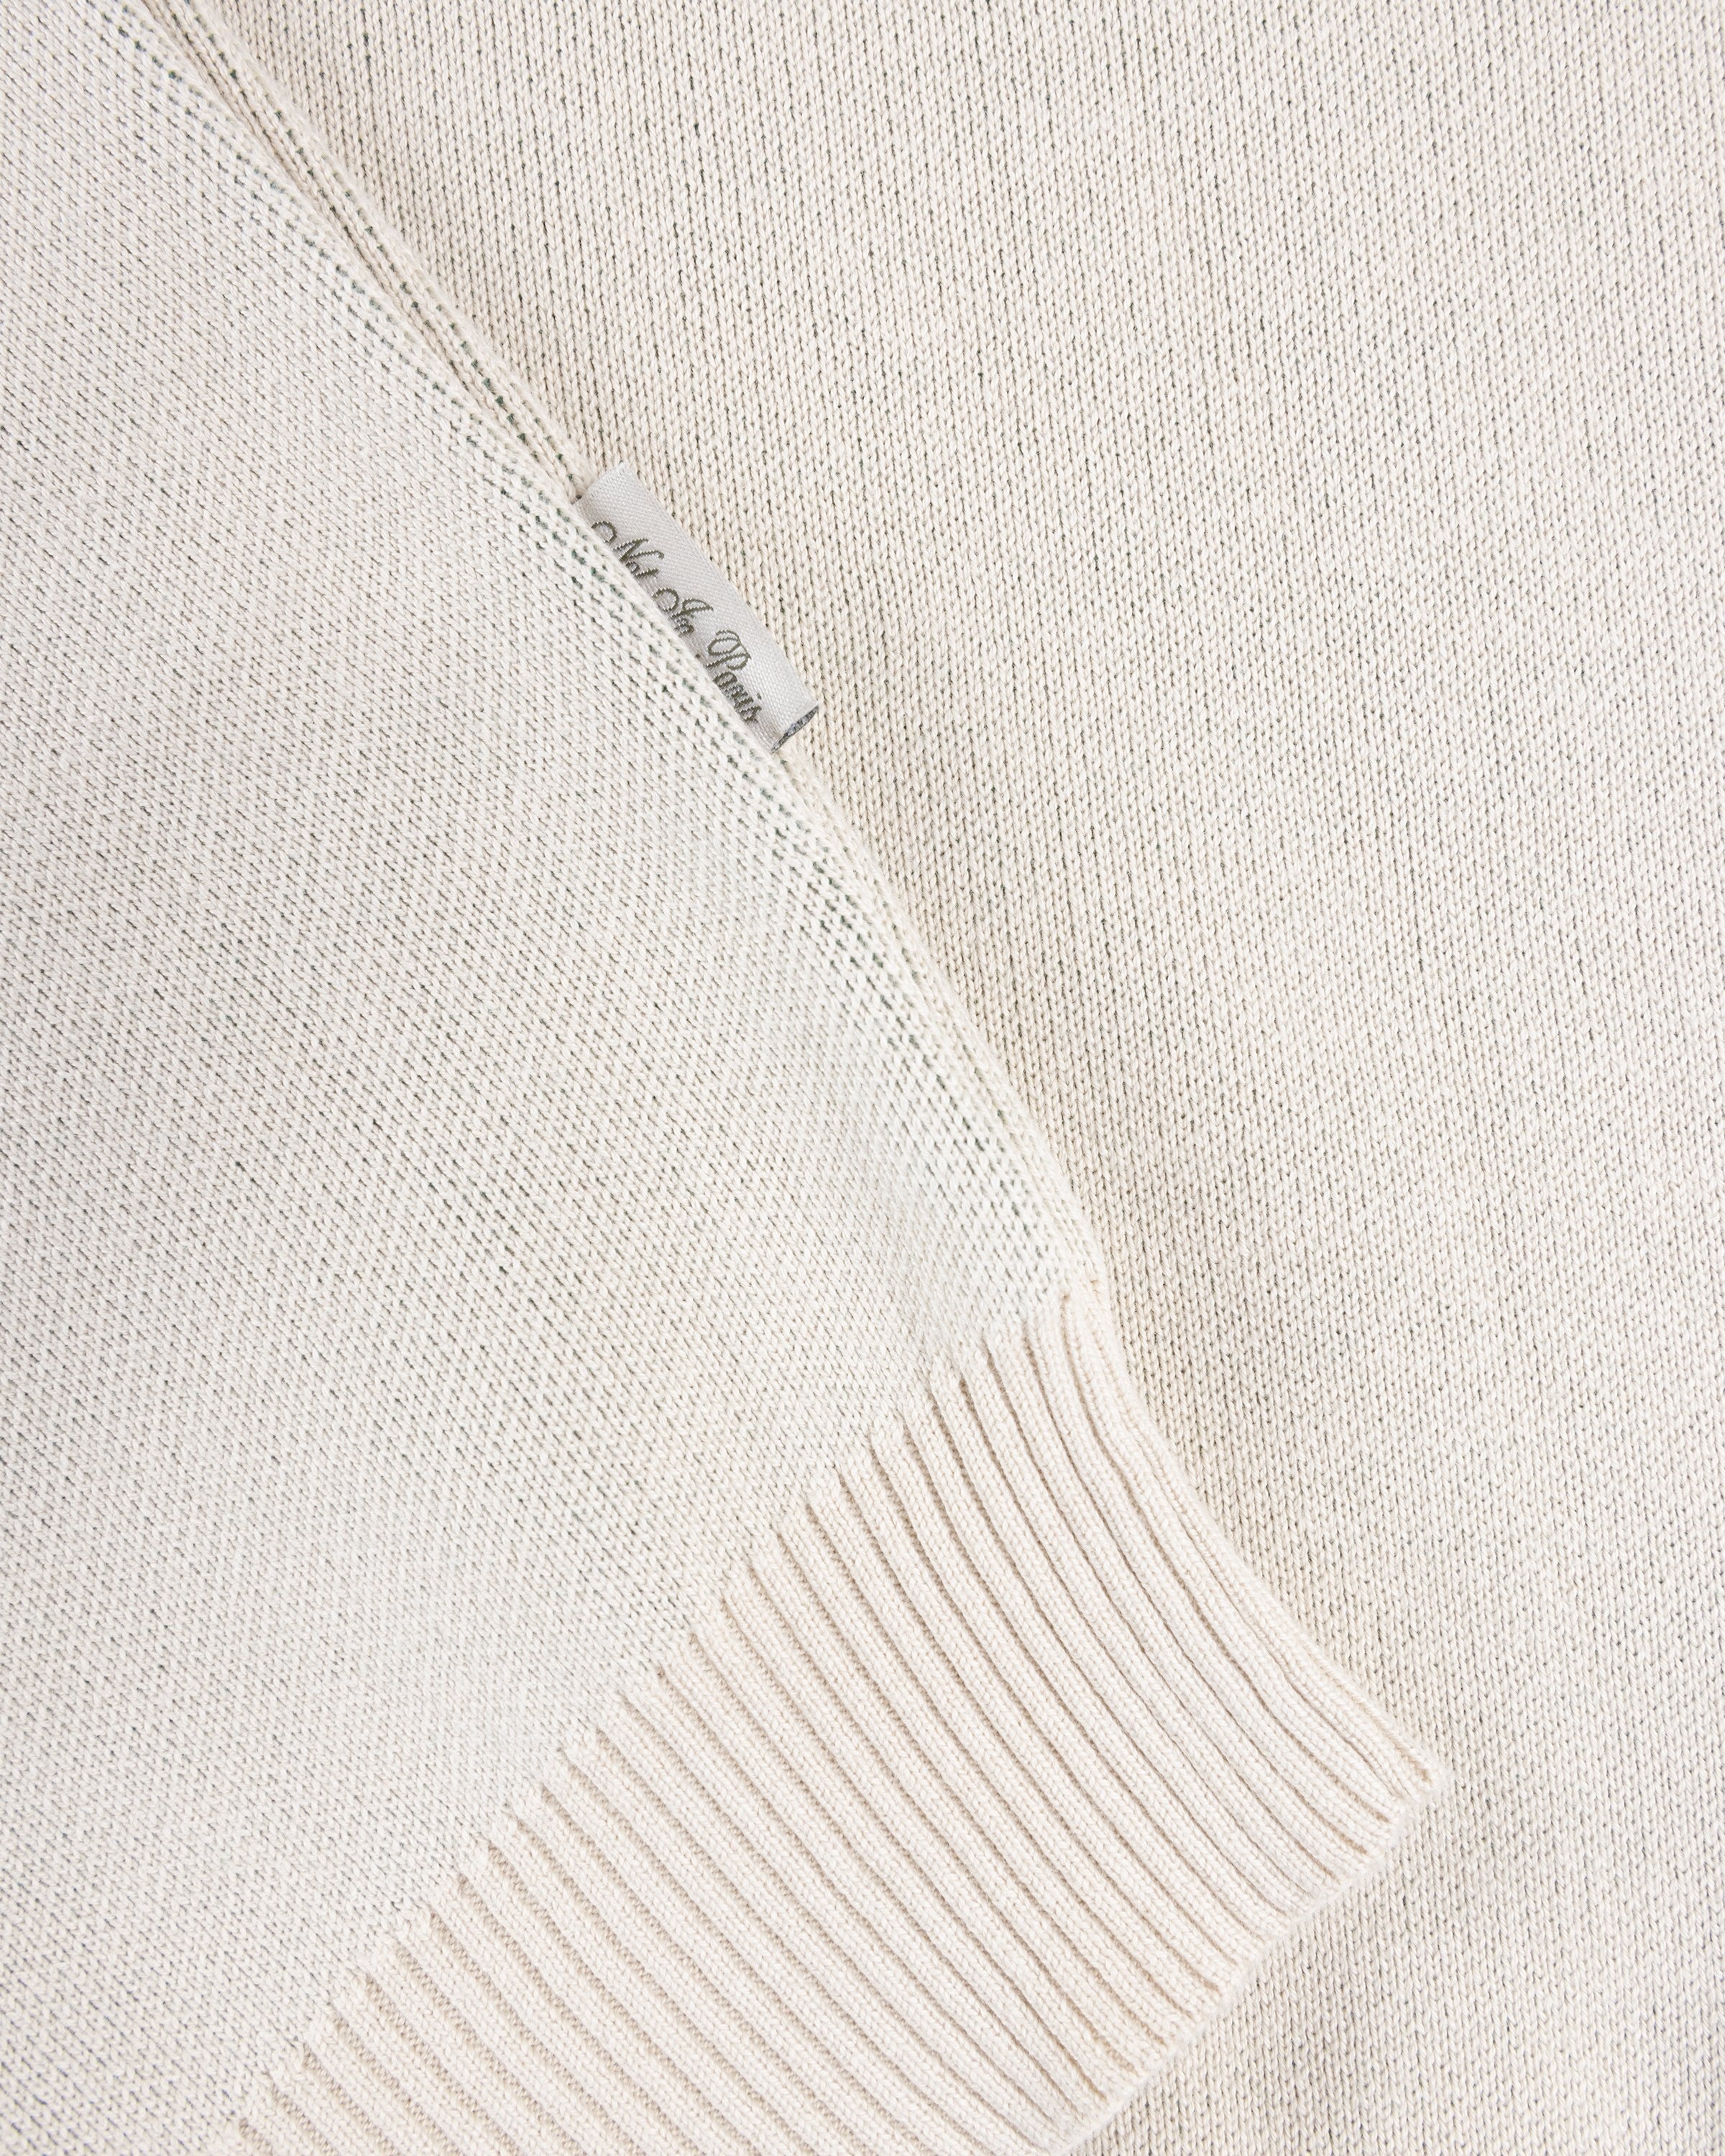 Highsnobiety – Not in Paris 5 Knitted Sweater - Sweats - Beige - Image 8